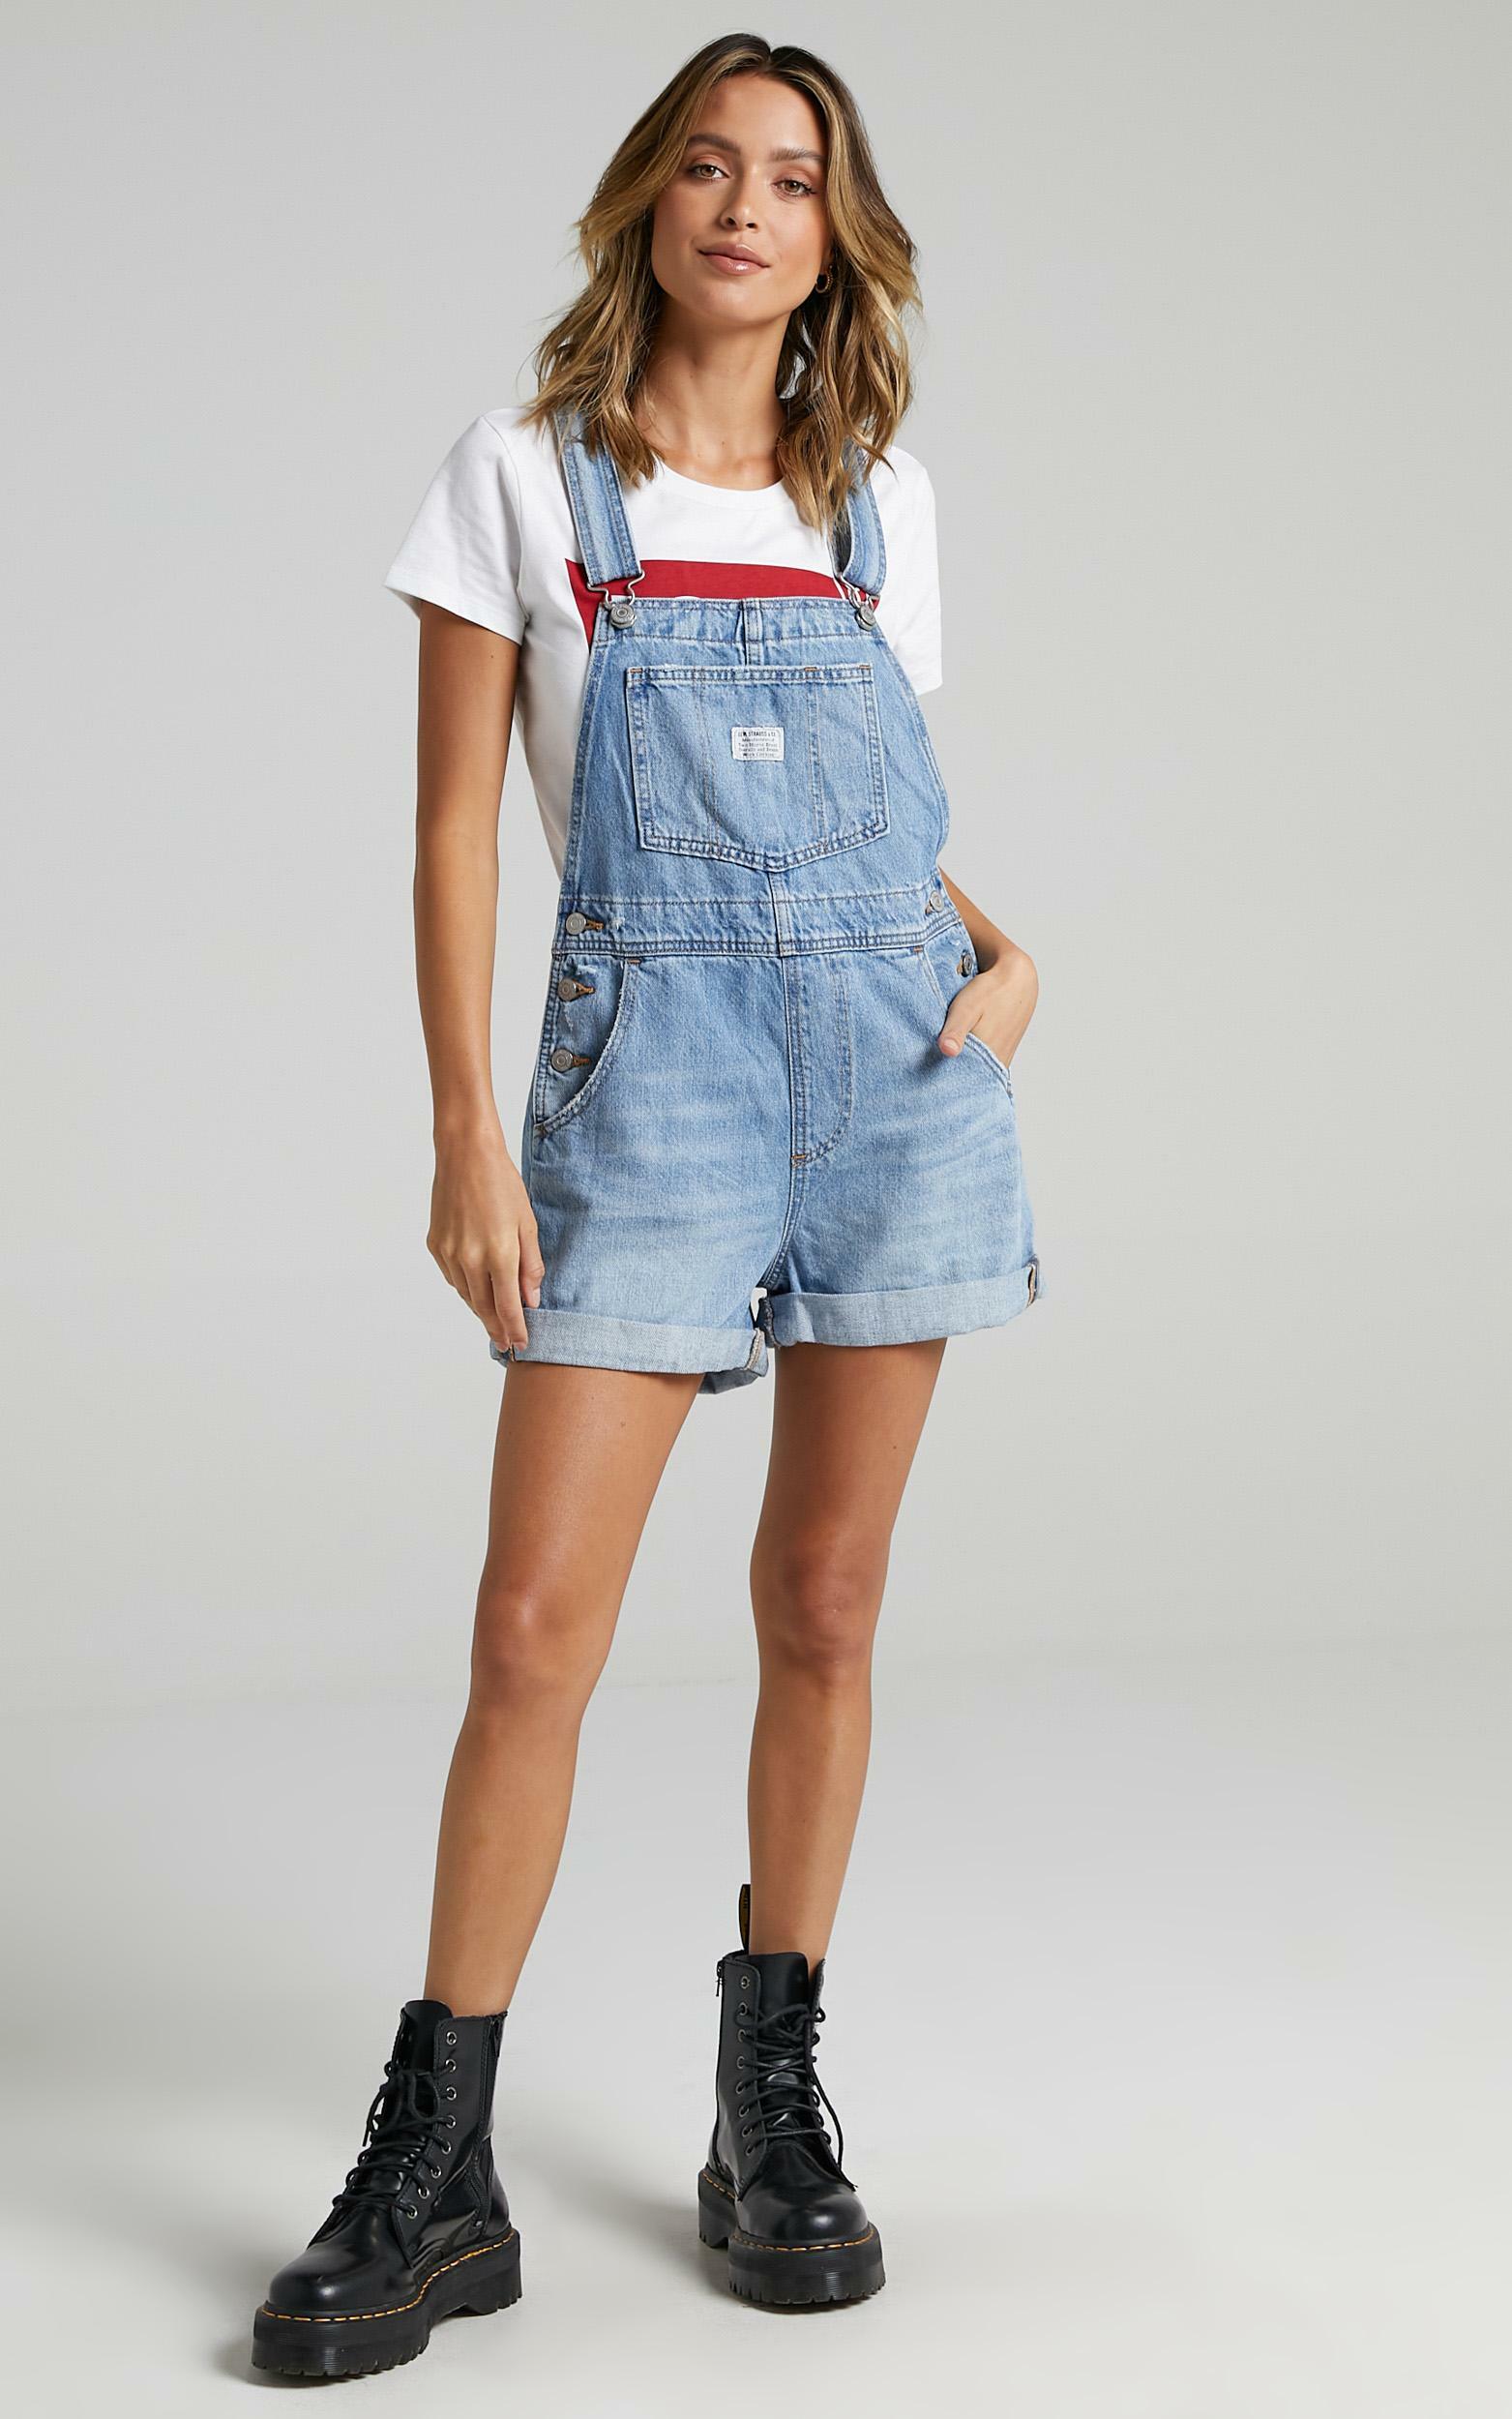 Levi's - Vintage Overall in Open Skies | Showpo USA